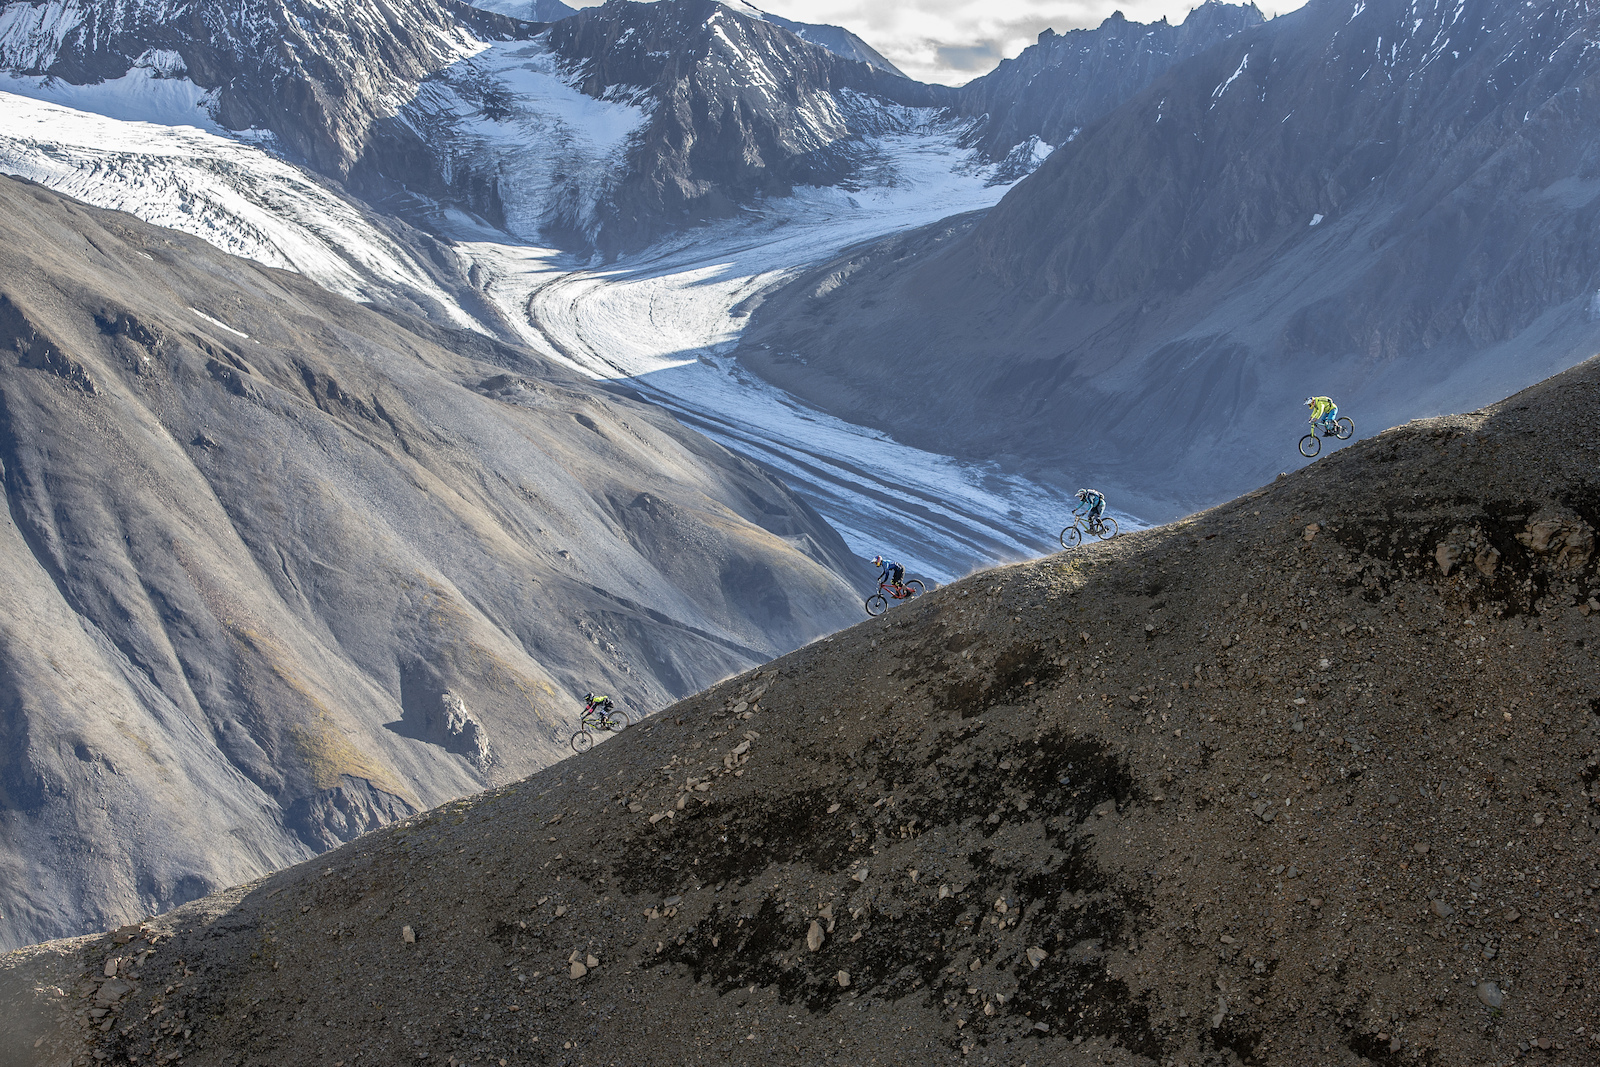 Tyler McCaul, Carson Storch, Wade Simmons and Darren Berrecloth ride down a previously untouched slope in the Tatshenshini-Alsek Provincial Park in British Columbia, Canada on September 3, 2016.